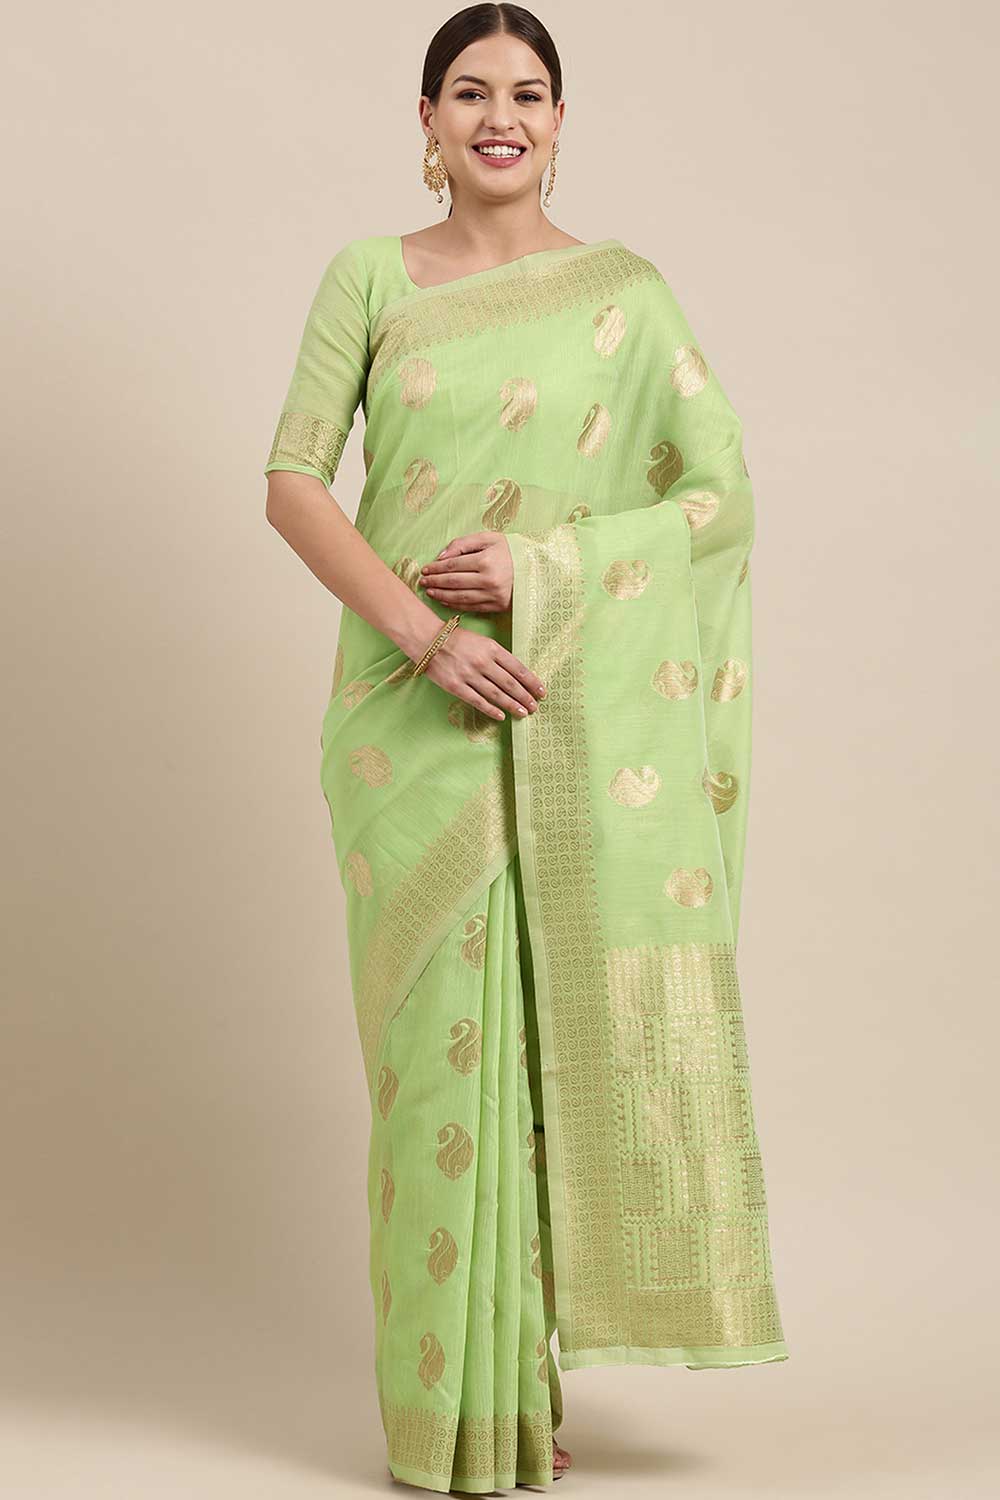 Buy Chaya Green Bagh Blended Linen One Minute Saree Online - One Minute Saree